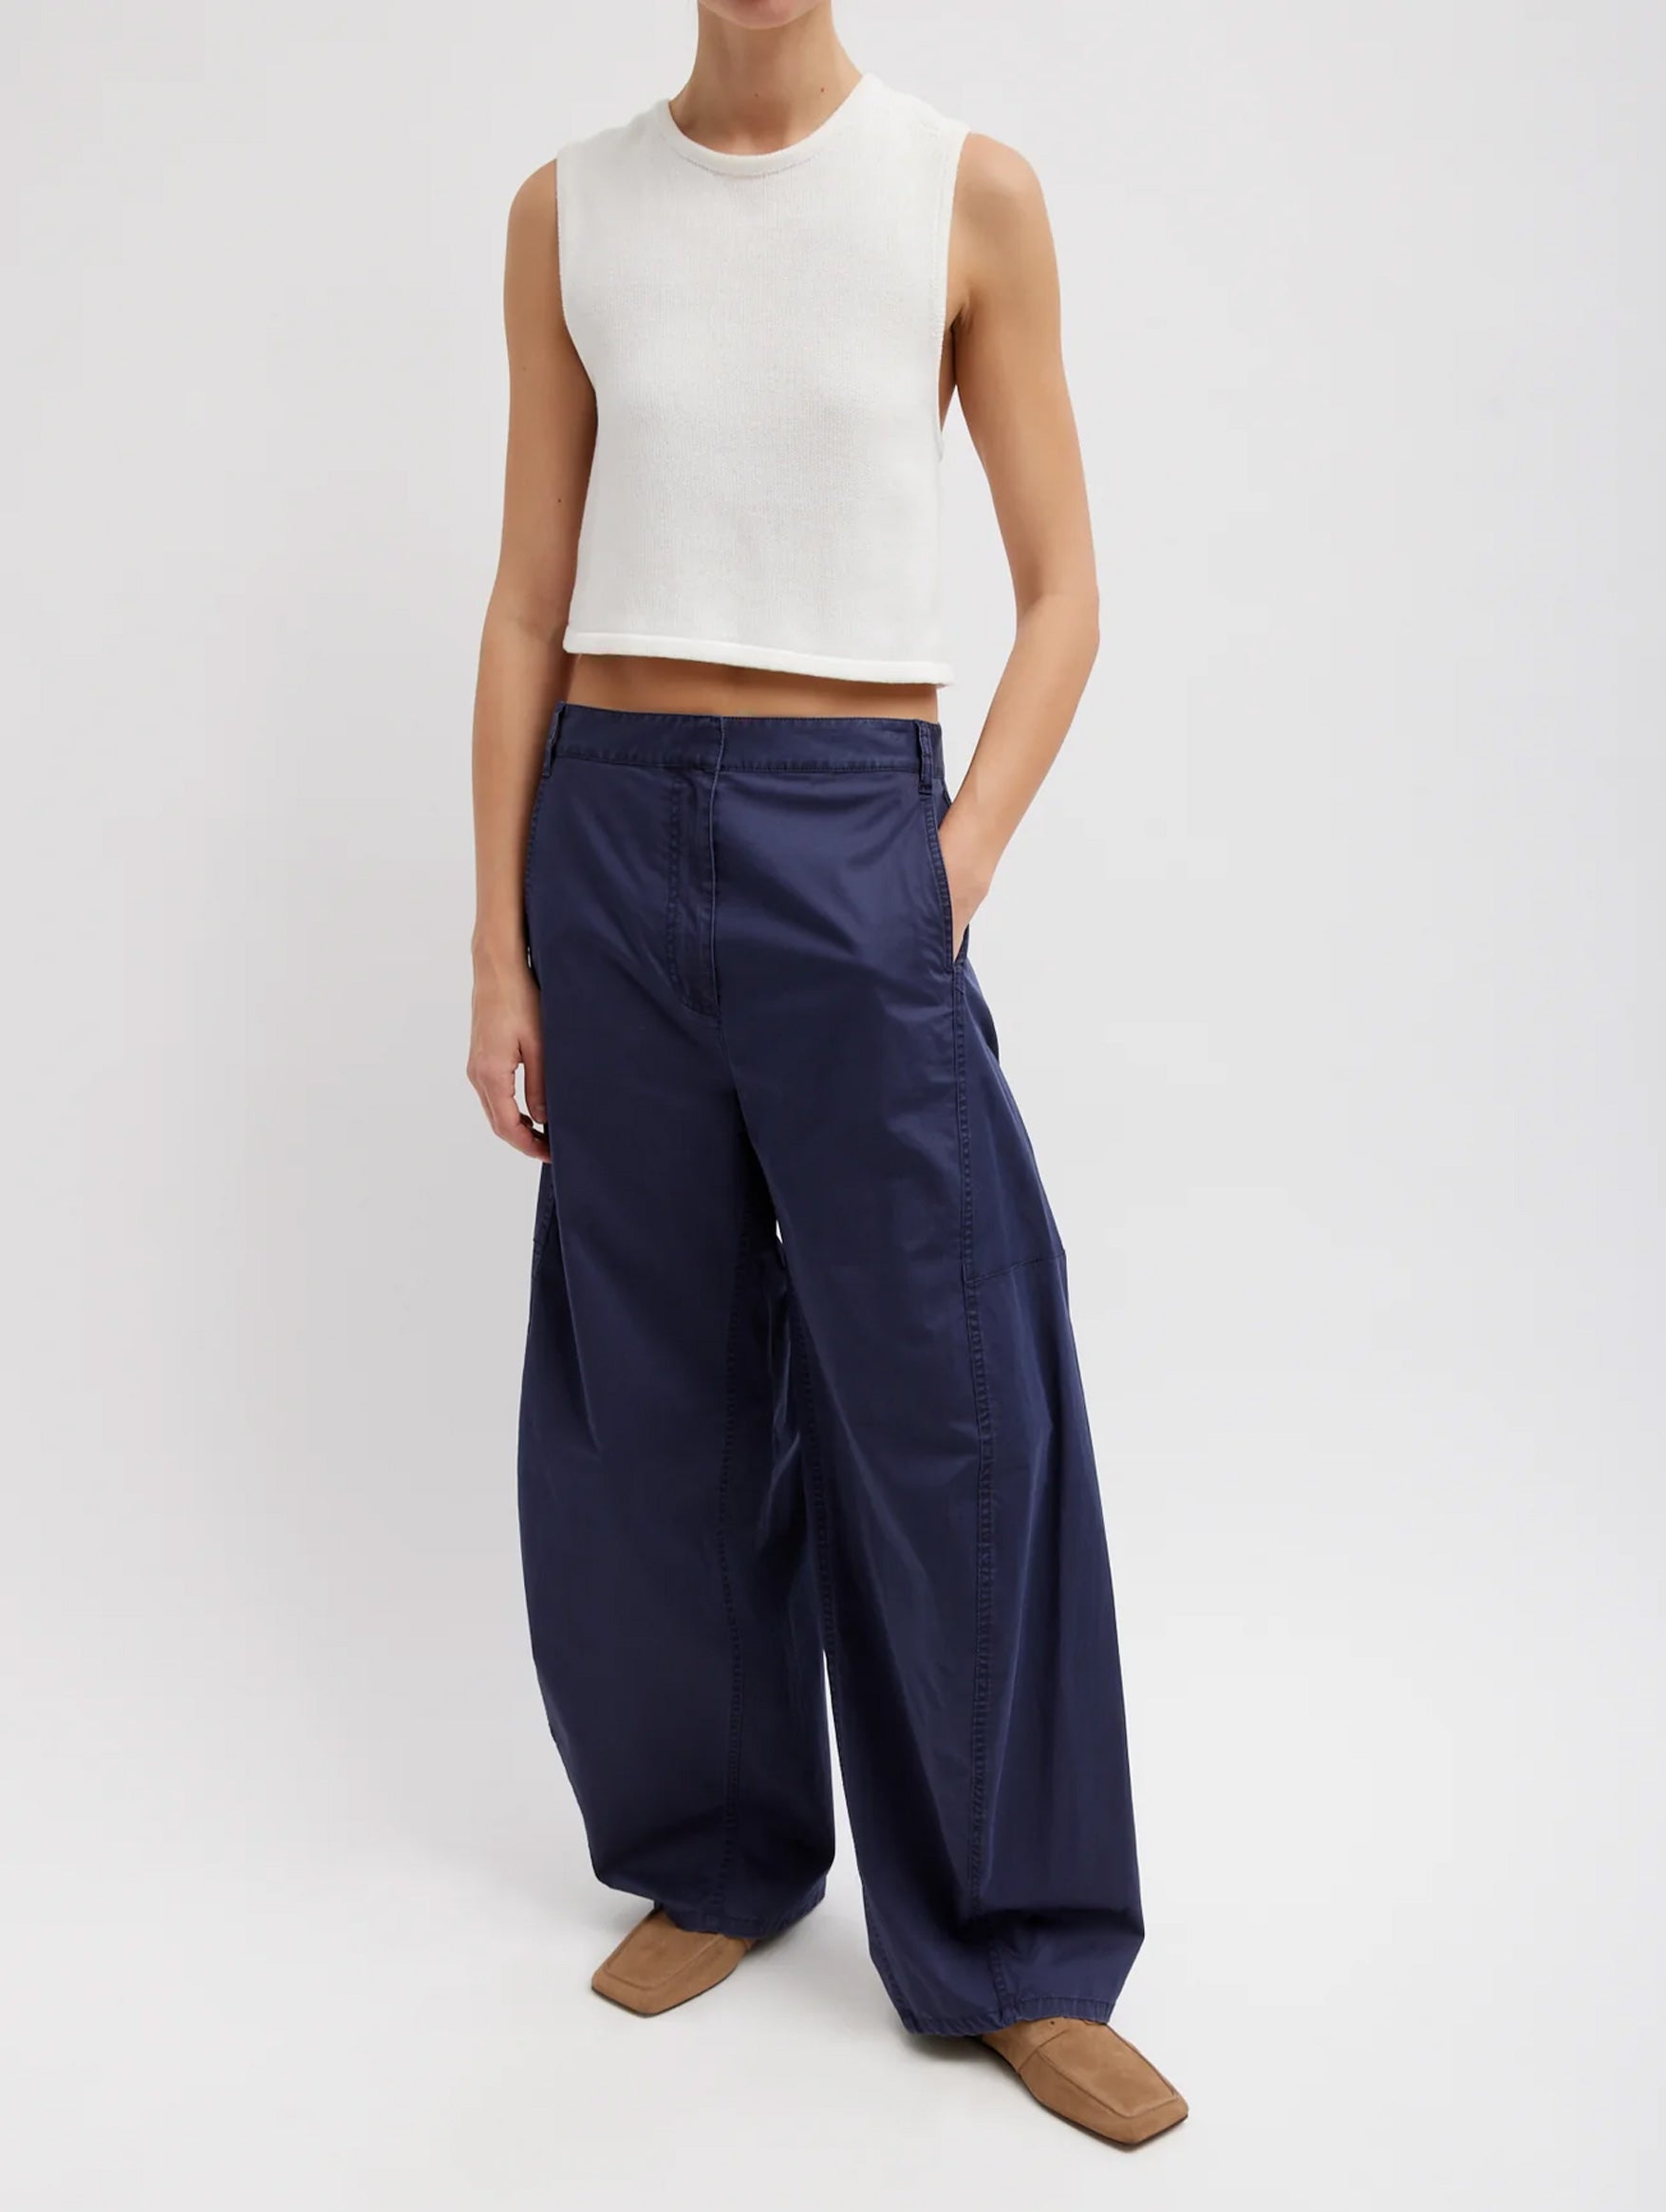 Garment Dyed Silky Cotton Sid Chino Pant in Navy - Short